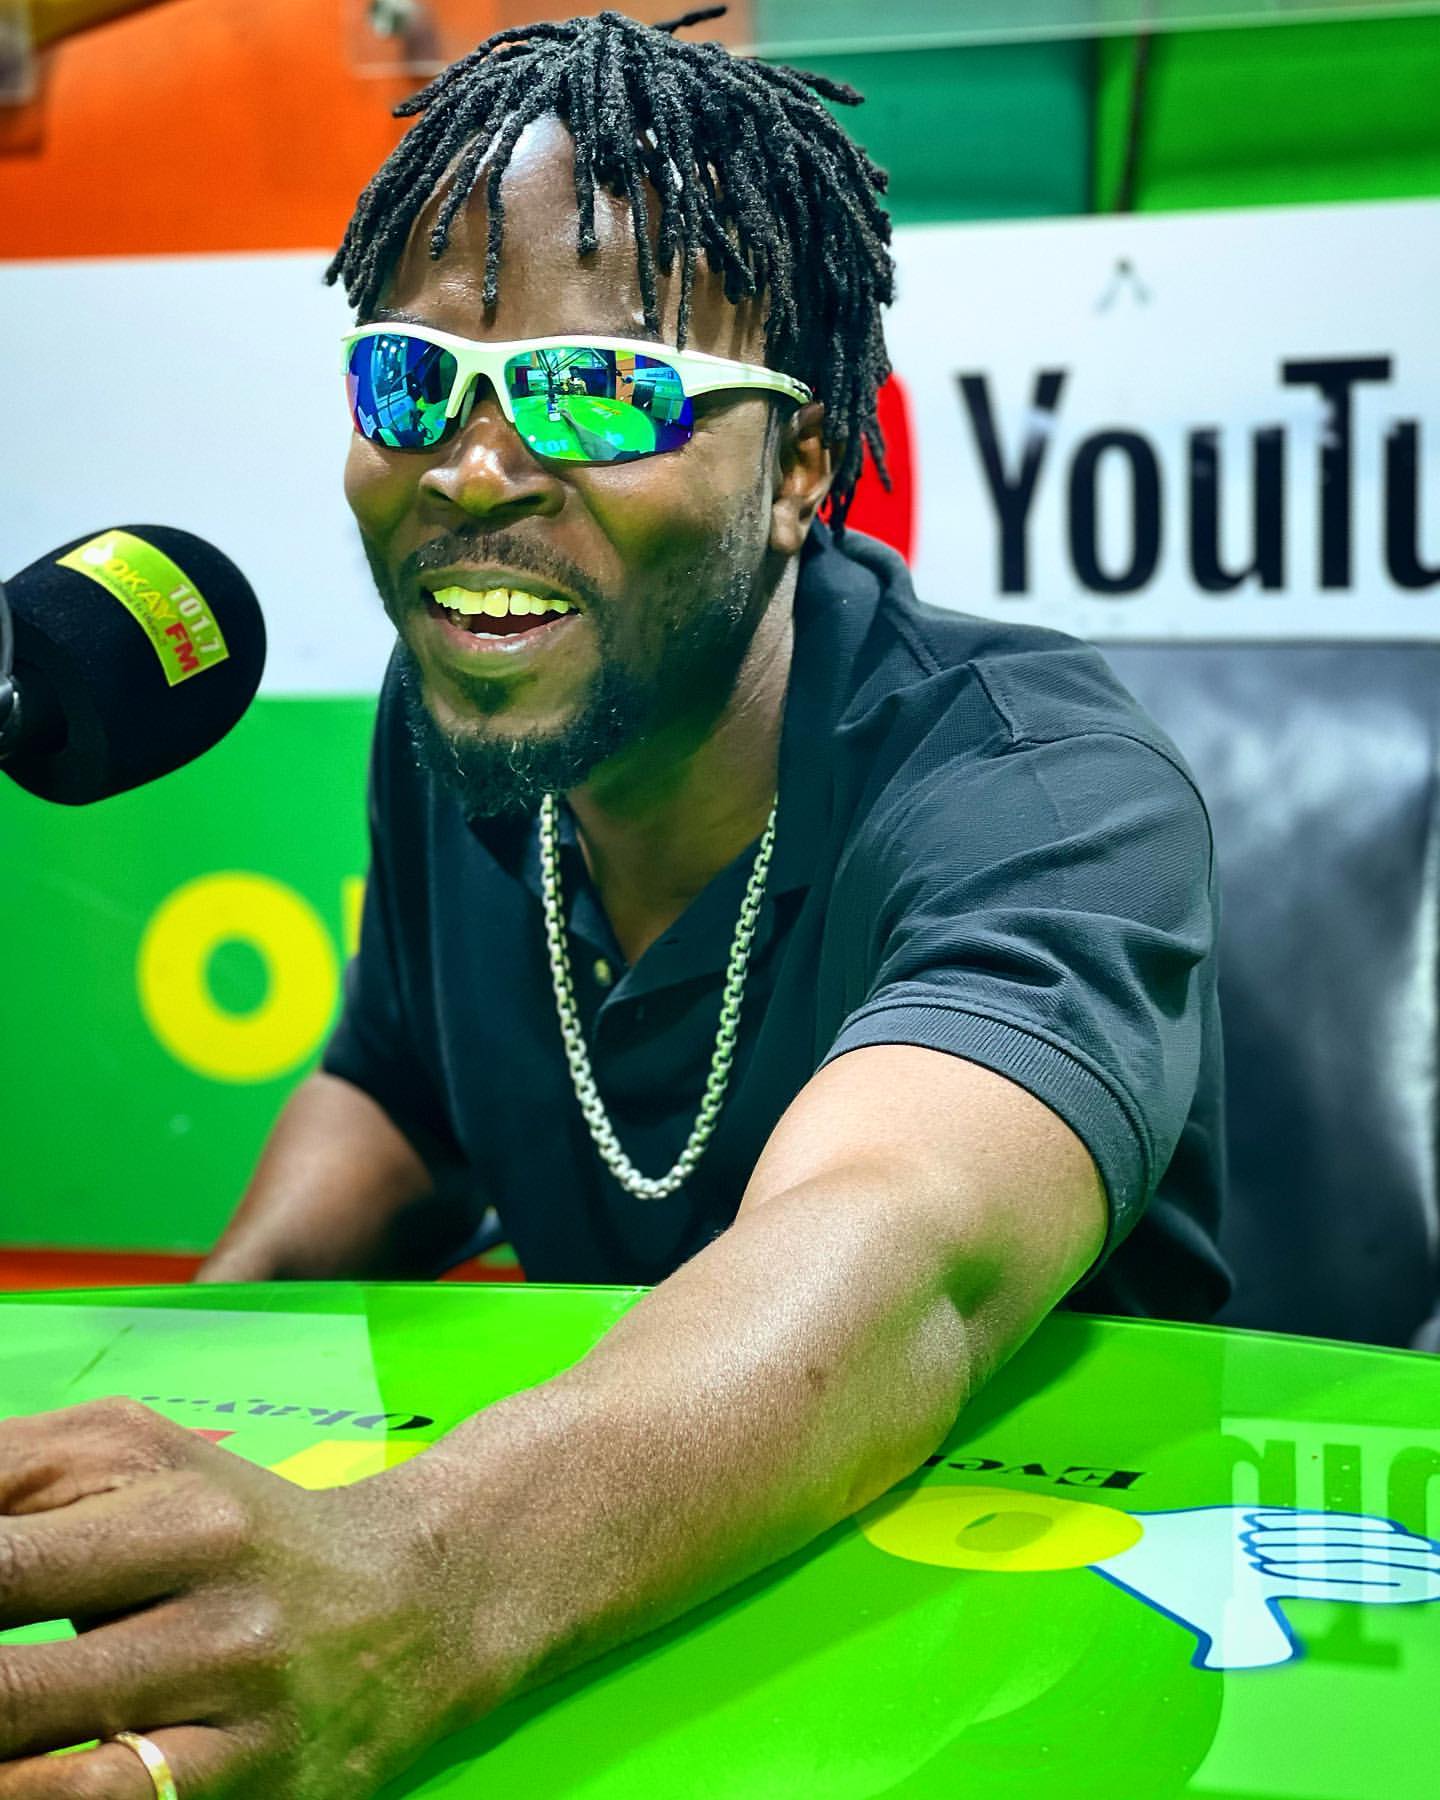 Wee is making me look younger than my age - Kwaw Kese